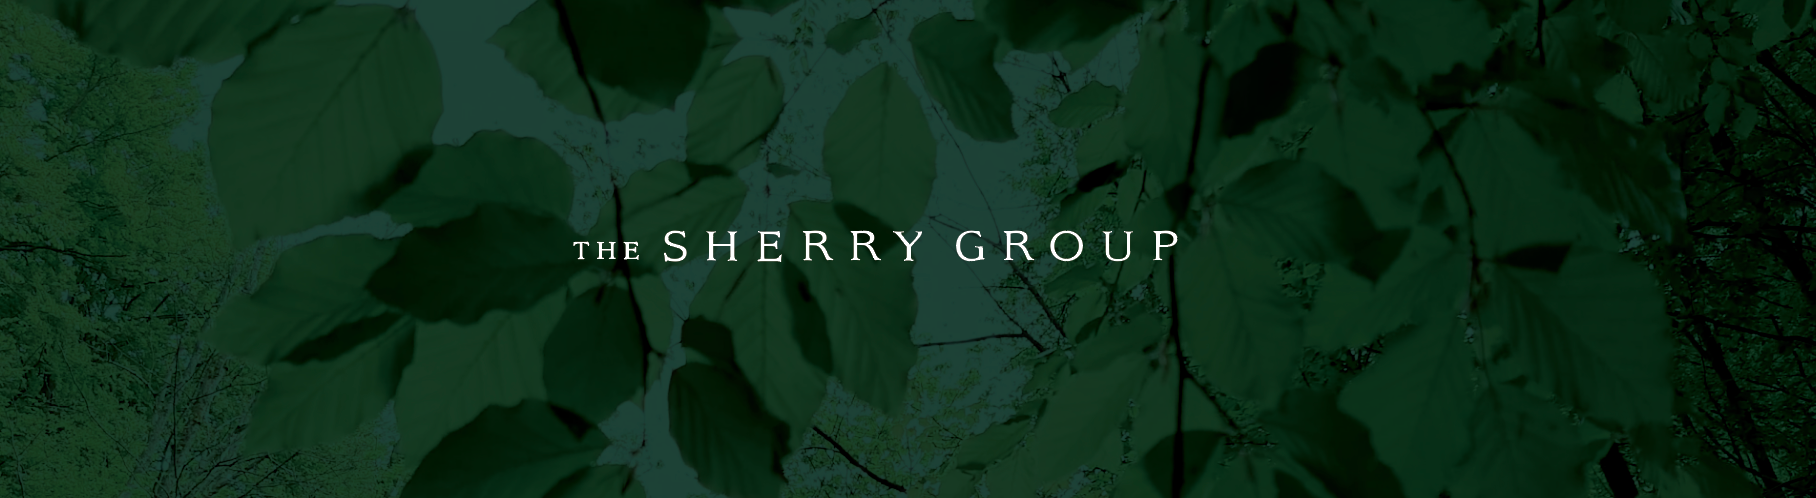 The sherry group logo is on a green background with leaves.